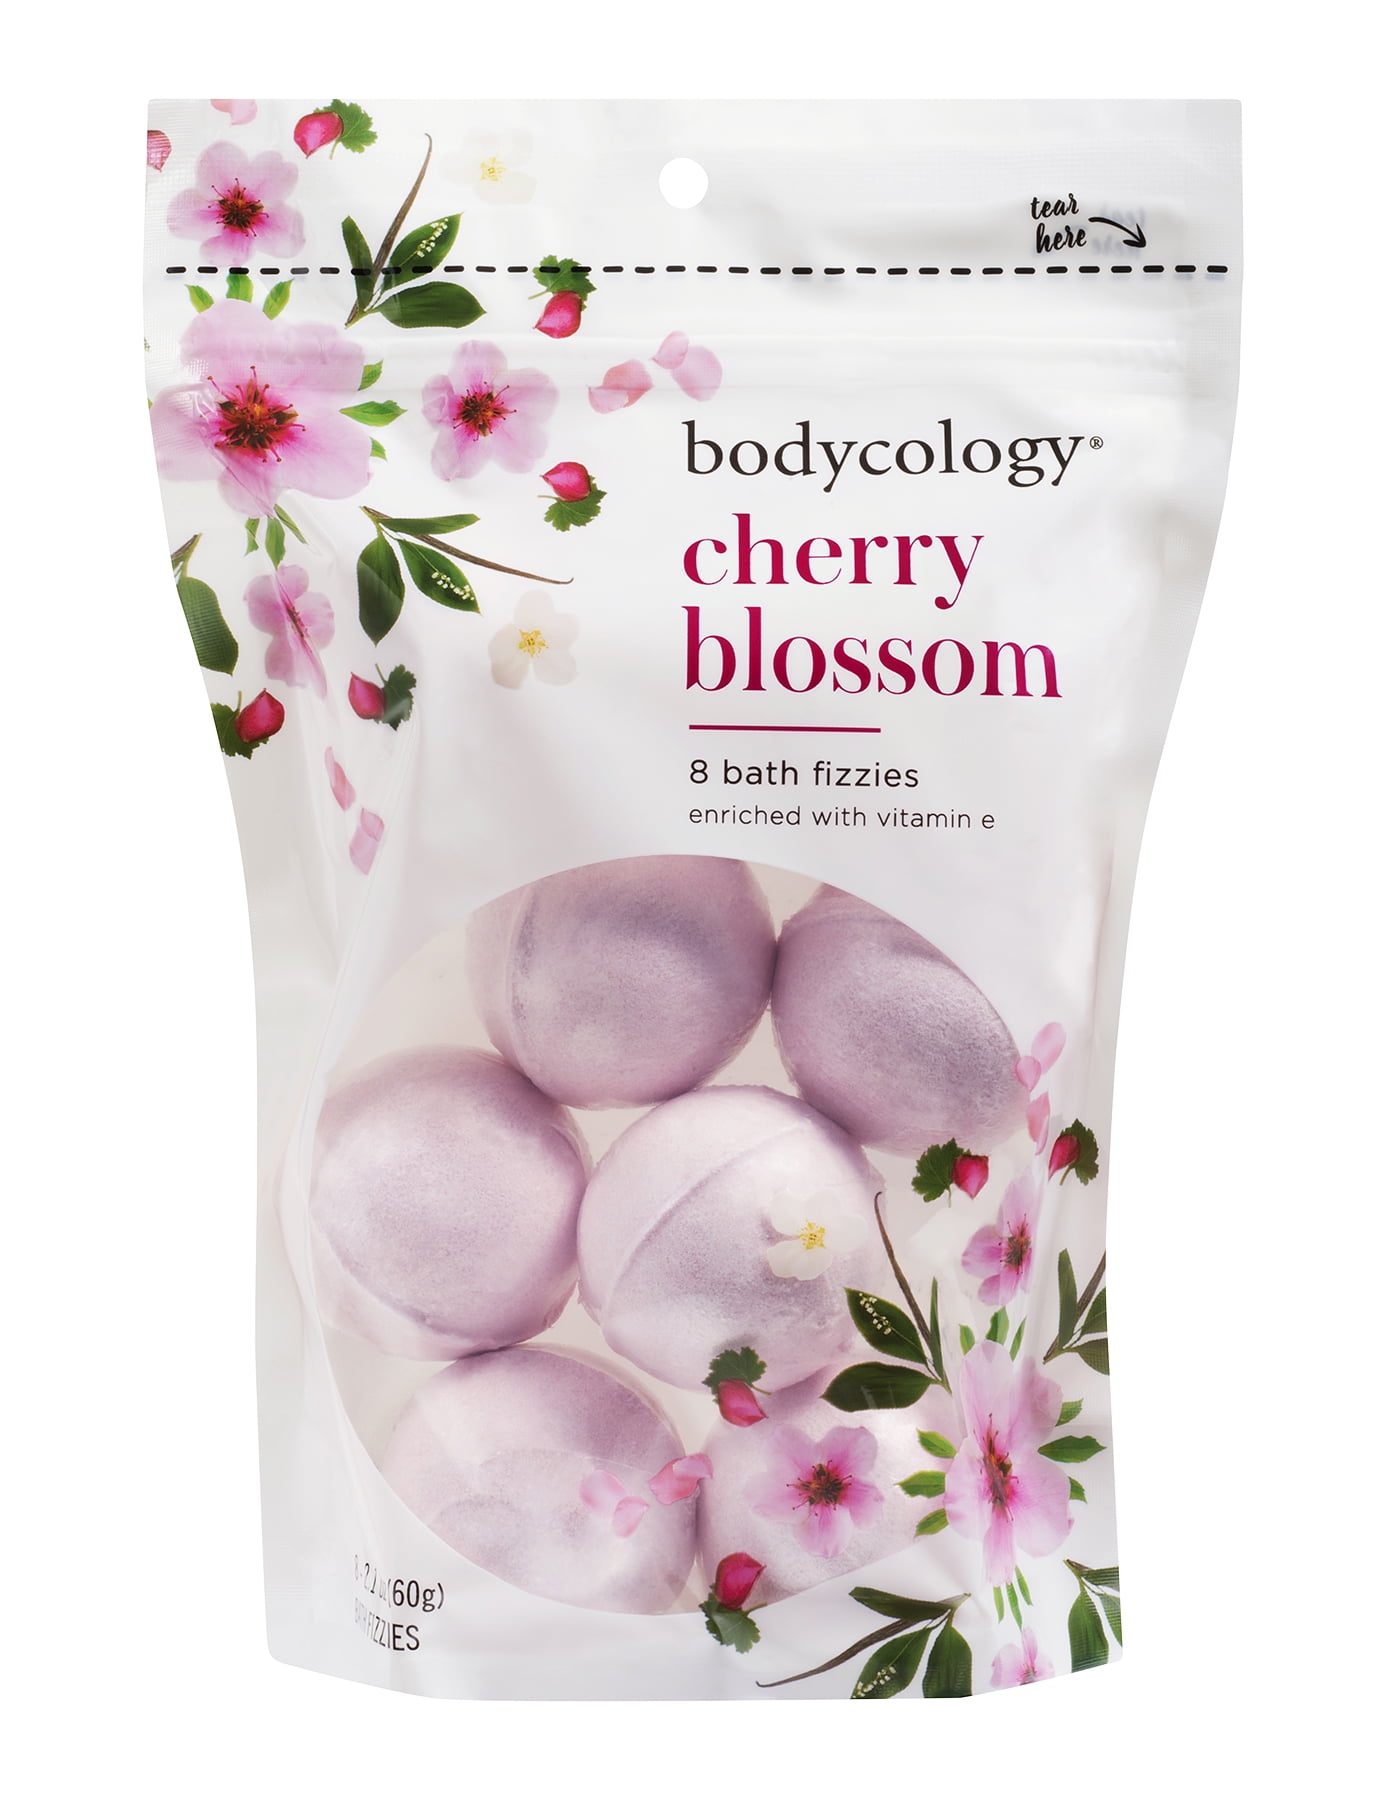 Bodycology Bath Fizzies, Cherry Blossom, 2.1 oz - 8 count